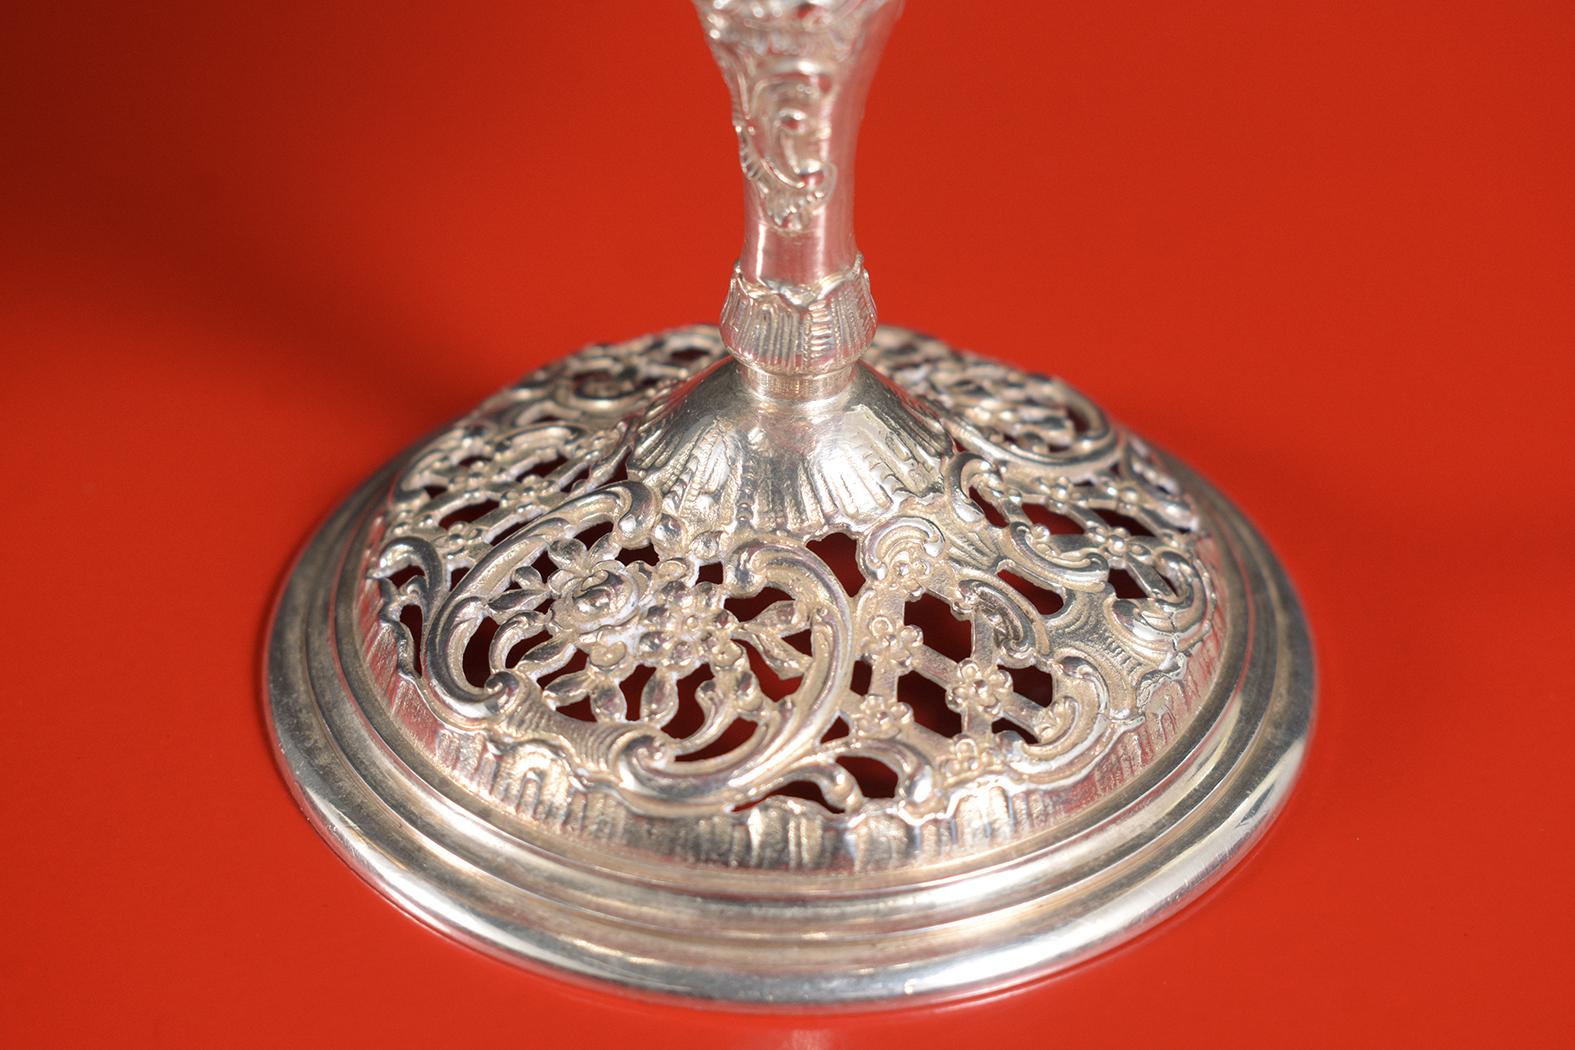 Hand-Crafted 1970s Sterling Silver Compote: Delicate Intricate Design & Timeless Elegance